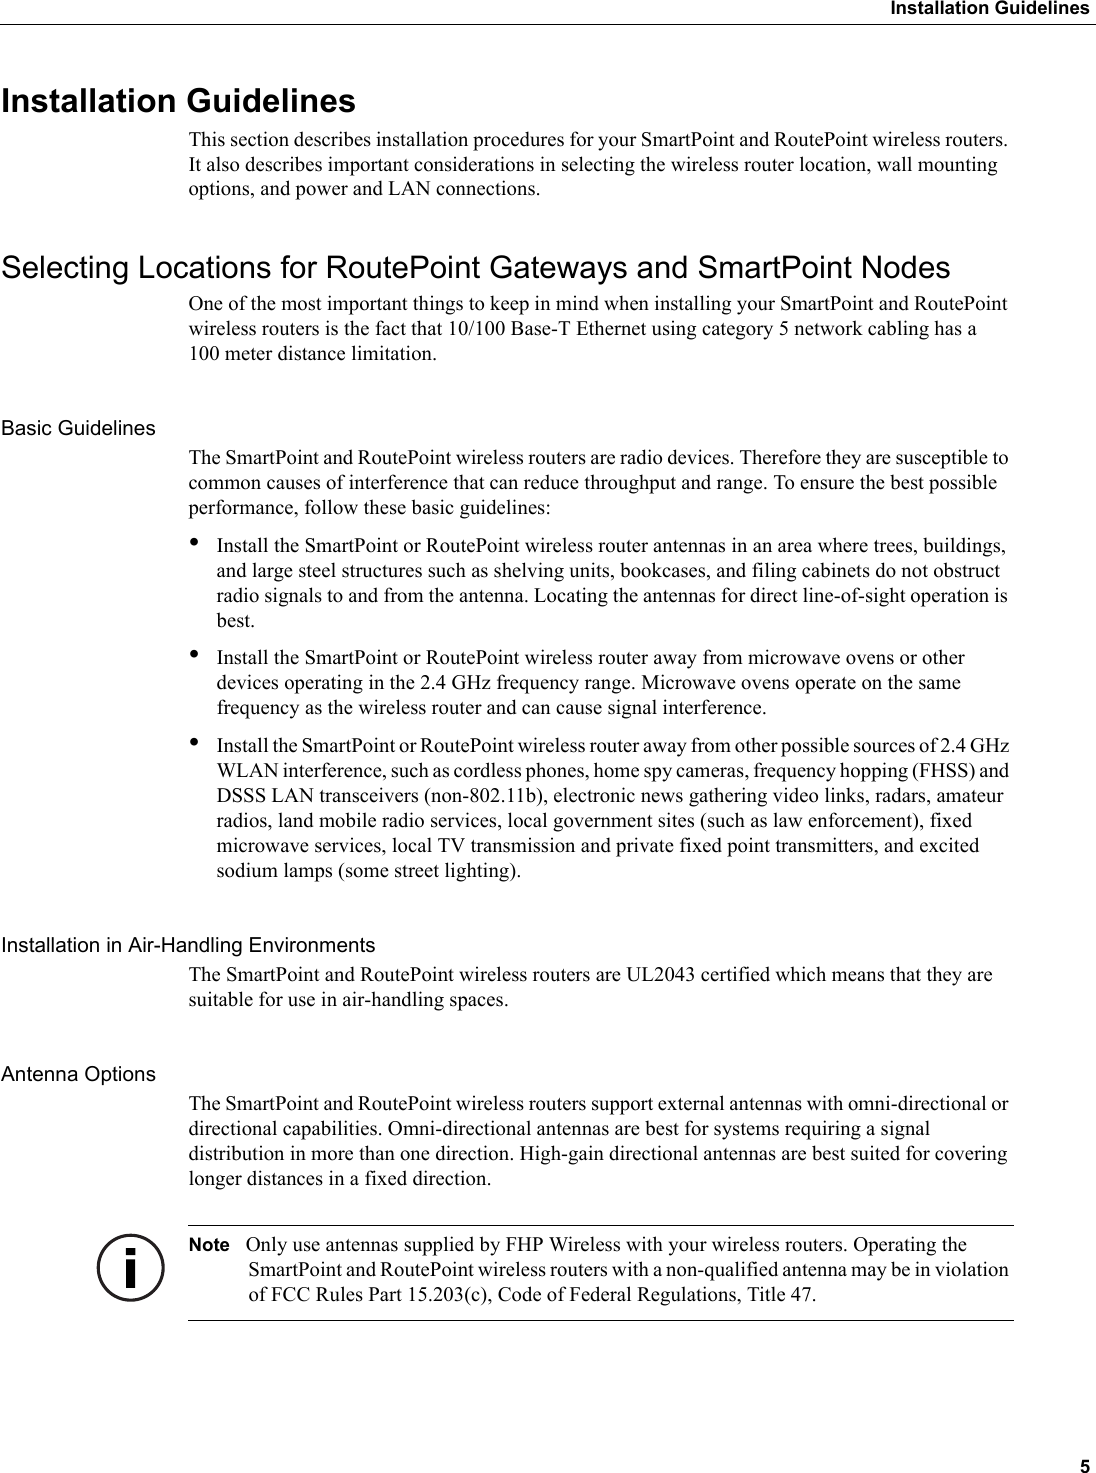  5Installation GuidelinesInstallation GuidelinesThis section describes installation procedures for your SmartPoint and RoutePoint wireless routers. It also describes important considerations in selecting the wireless router location, wall mounting options, and power and LAN connections.Selecting Locations for RoutePoint Gateways and SmartPoint NodesOne of the most important things to keep in mind when installing your SmartPoint and RoutePoint wireless routers is the fact that 10/100 Base-T Ethernet using category 5 network cabling has a 100 meter distance limitation. Basic GuidelinesThe SmartPoint and RoutePoint wireless routers are radio devices. Therefore they are susceptible to common causes of interference that can reduce throughput and range. To ensure the best possible performance, follow these basic guidelines:•Install the SmartPoint or RoutePoint wireless router antennas in an area where trees, buildings, and large steel structures such as shelving units, bookcases, and filing cabinets do not obstruct radio signals to and from the antenna. Locating the antennas for direct line-of-sight operation is best. •Install the SmartPoint or RoutePoint wireless router away from microwave ovens or other devices operating in the 2.4 GHz frequency range. Microwave ovens operate on the same frequency as the wireless router and can cause signal interference. •Install the SmartPoint or RoutePoint wireless router away from other possible sources of 2.4 GHz WLAN interference, such as cordless phones, home spy cameras, frequency hopping (FHSS) and DSSS LAN transceivers (non-802.11b), electronic news gathering video links, radars, amateur radios, land mobile radio services, local government sites (such as law enforcement), fixed microwave services, local TV transmission and private fixed point transmitters, and excited sodium lamps (some street lighting).Installation in Air-Handling EnvironmentsThe SmartPoint and RoutePoint wireless routers are UL2043 certified which means that they are suitable for use in air-handling spaces.Antenna OptionsThe SmartPoint and RoutePoint wireless routers support external antennas with omni-directional or directional capabilities. Omni-directional antennas are best for systems requiring a signal distribution in more than one direction. High-gain directional antennas are best suited for covering longer distances in a fixed direction. Note Only use antennas supplied by FHP Wireless with your wireless routers. Operating the SmartPoint and RoutePoint wireless routers with a non-qualified antenna may be in violation of FCC Rules Part 15.203(c), Code of Federal Regulations, Title 47.